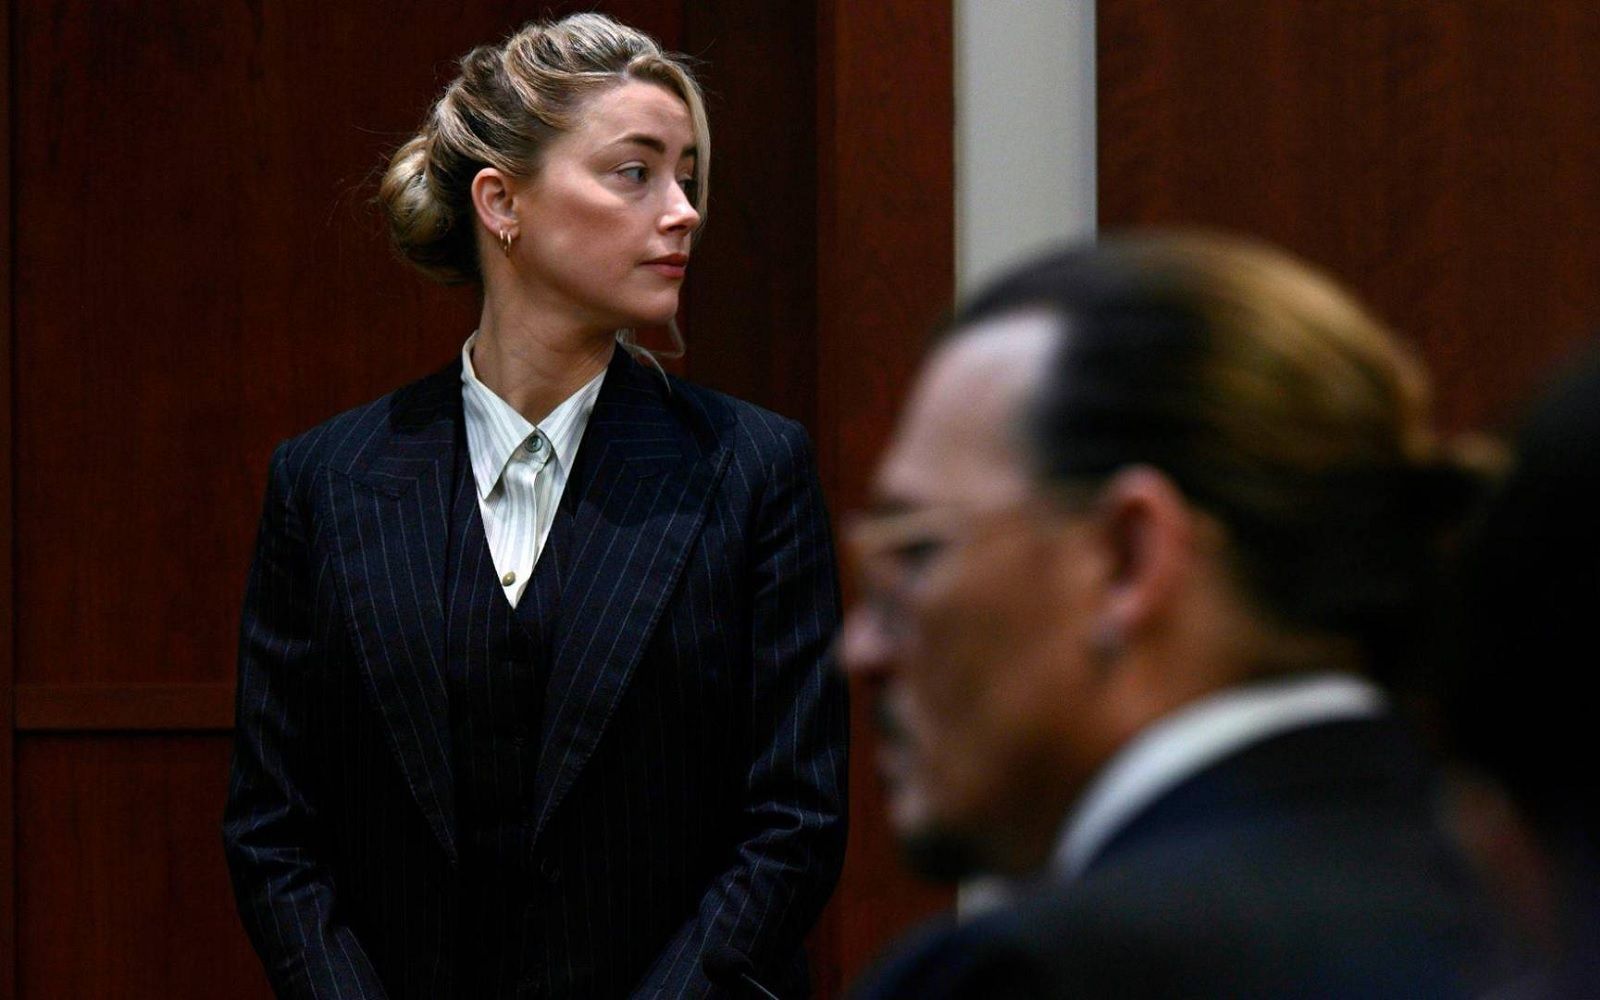 On Johnny Depp-Amber Heard trial, a documentary on the turning